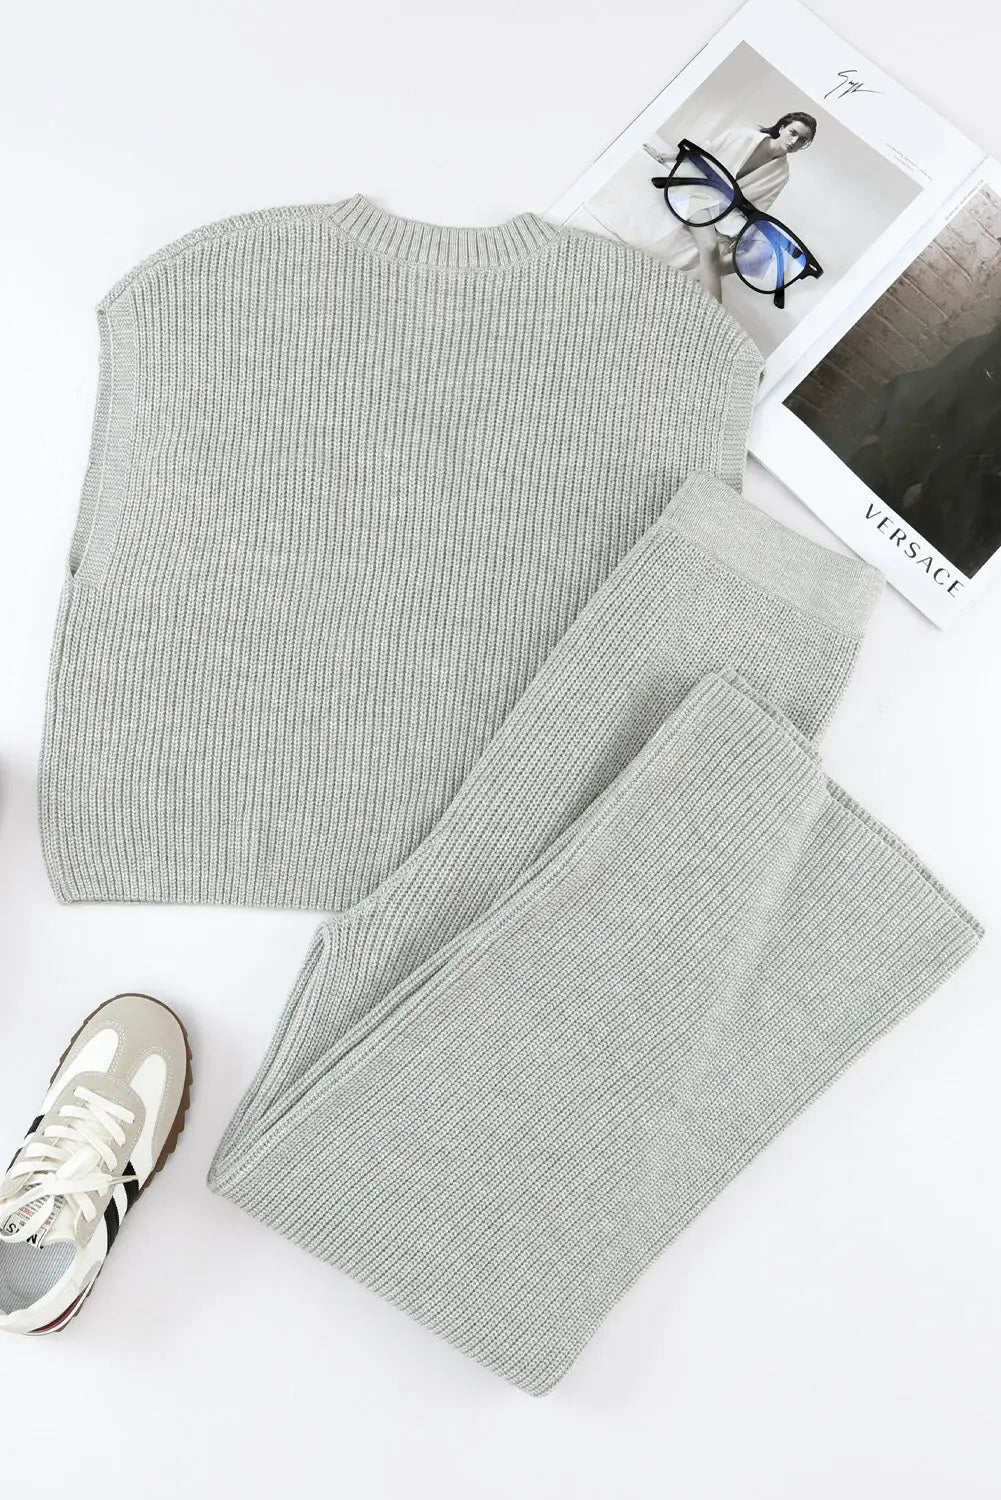 Gray knitted v neck sweater and casual pants set - loungewear